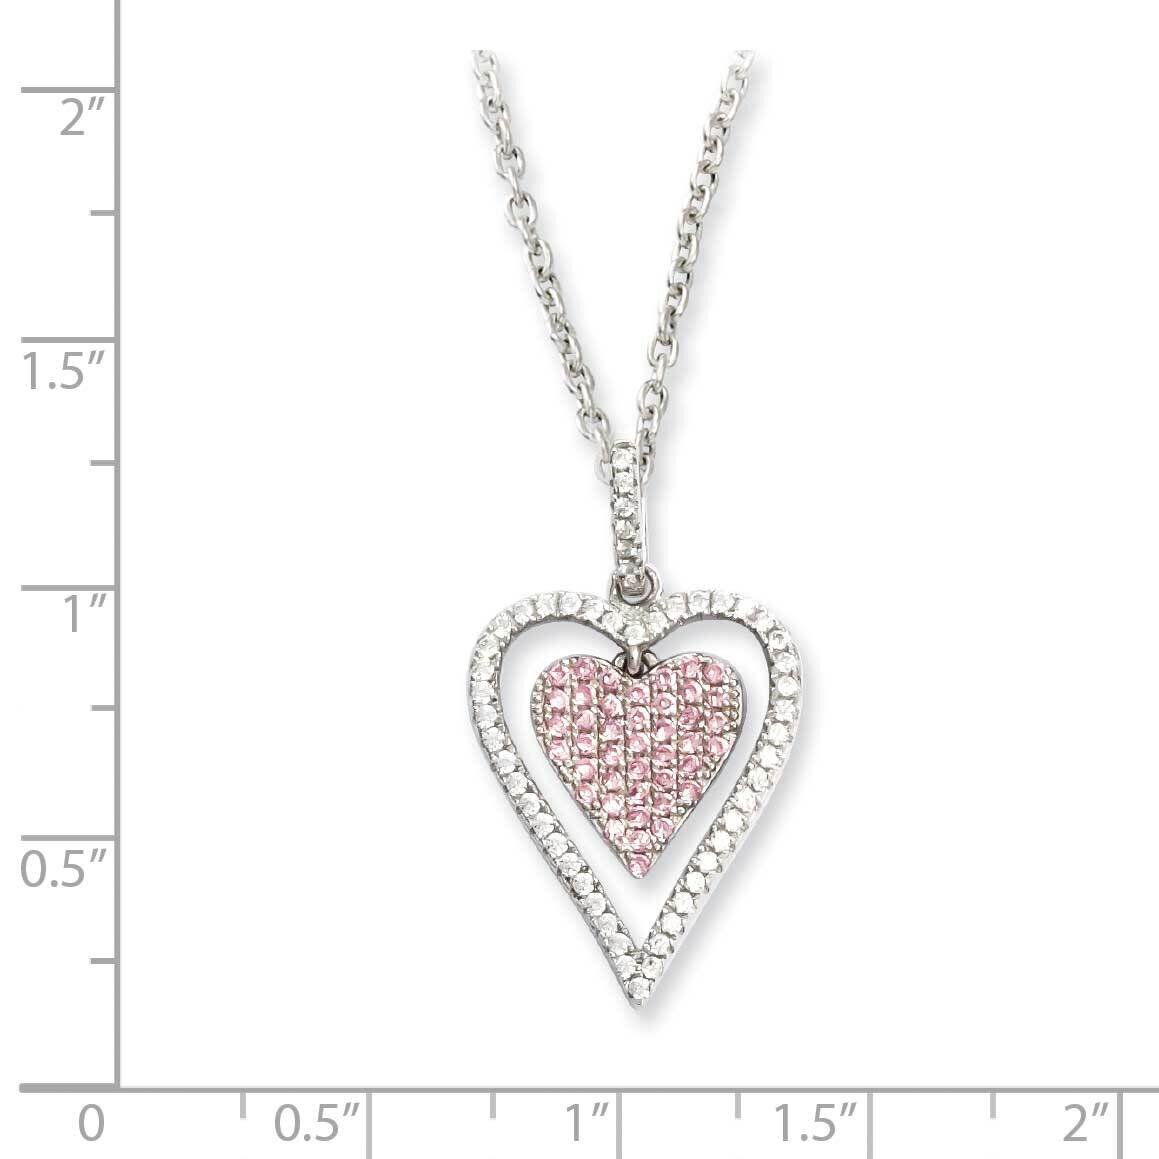 Heart Necklace Sterling Silver Rhodium-plated CZ Diamond QMP825-18